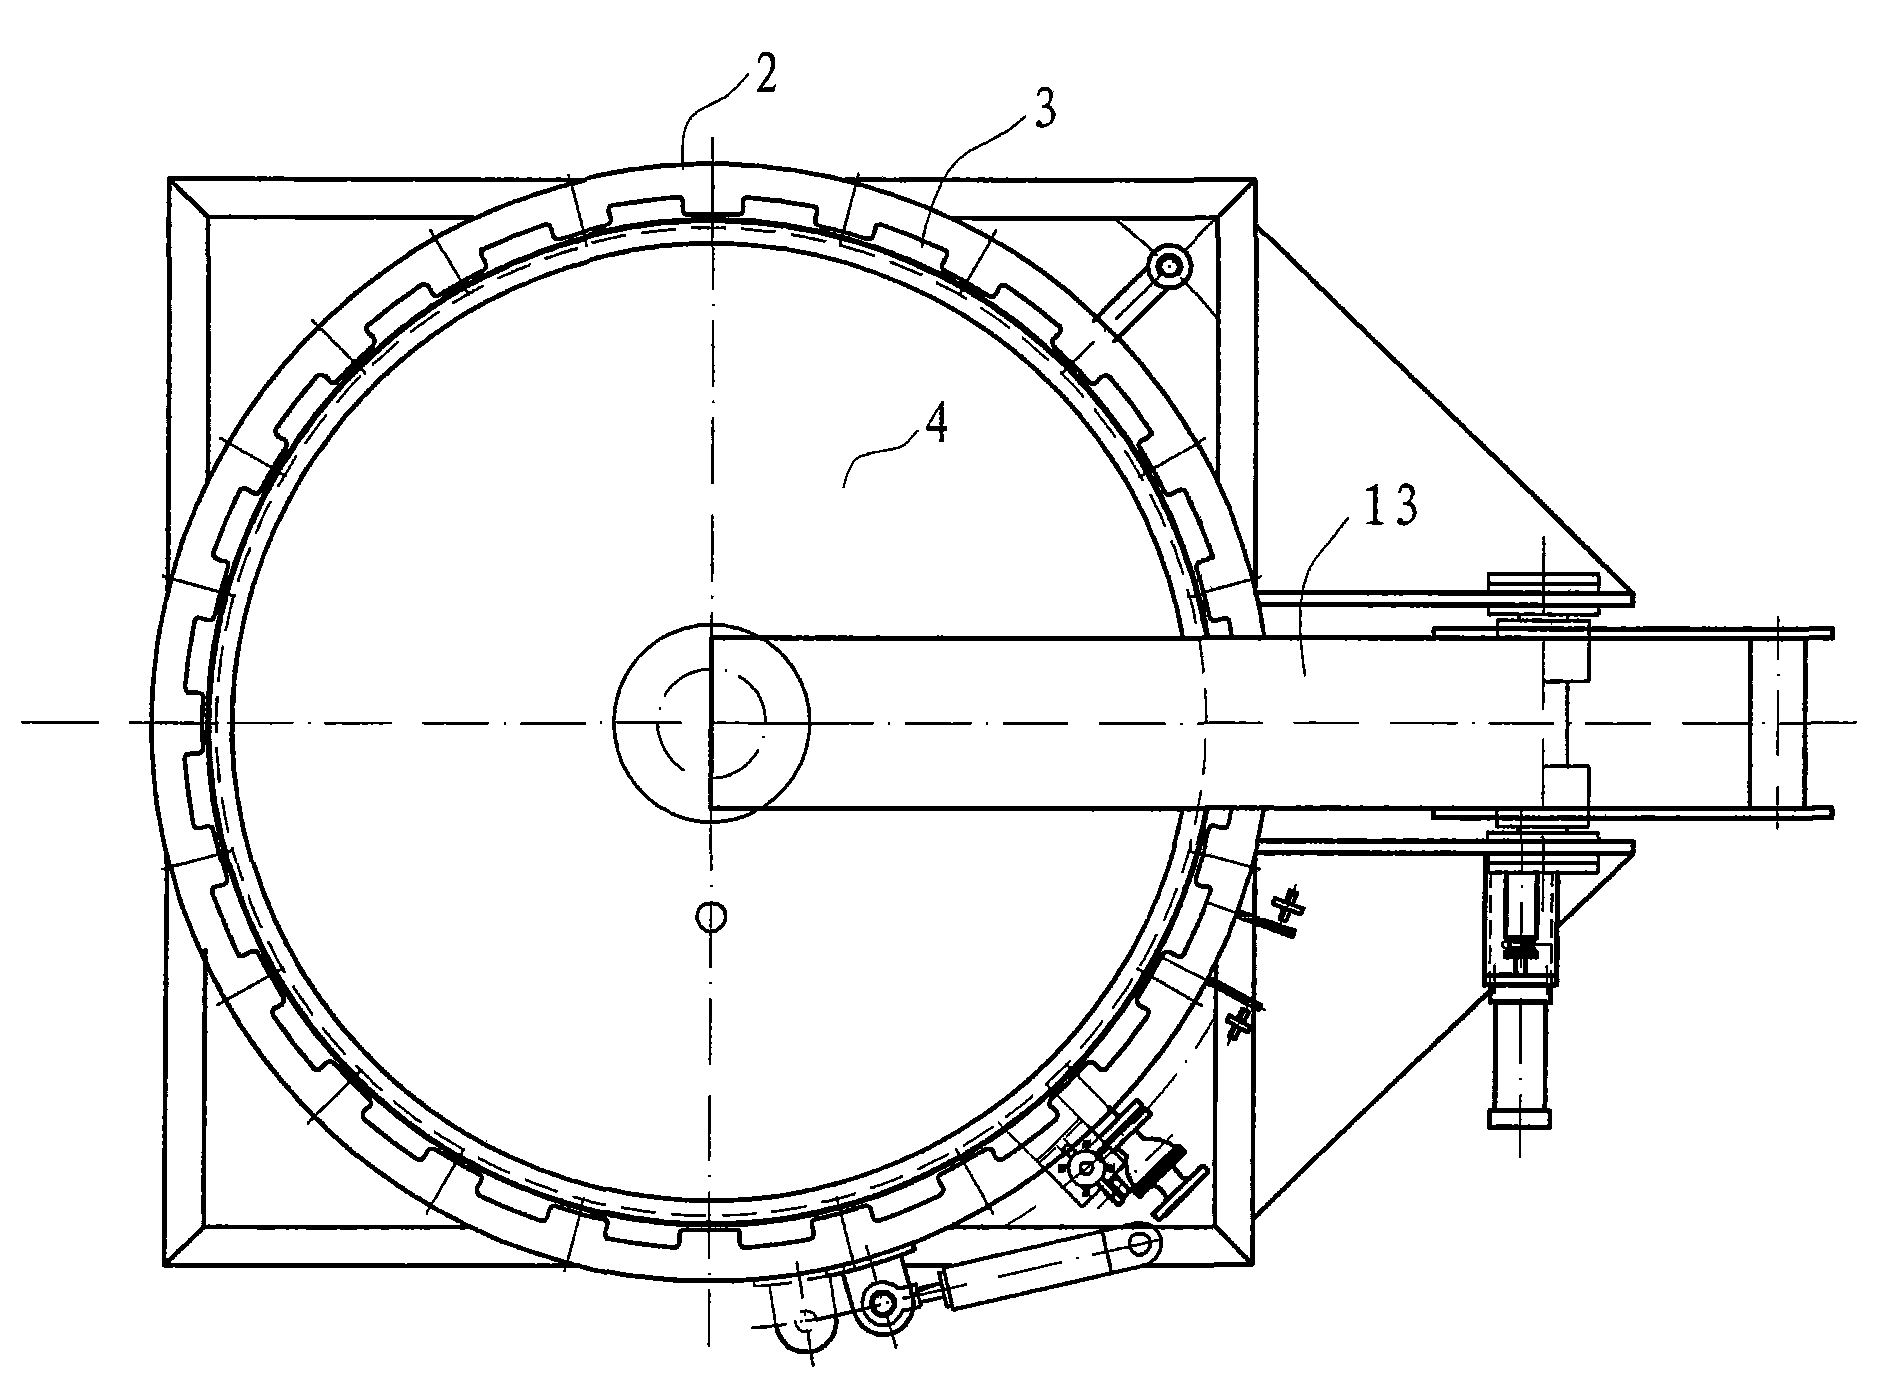 Circle quick door-opening device of pressure container